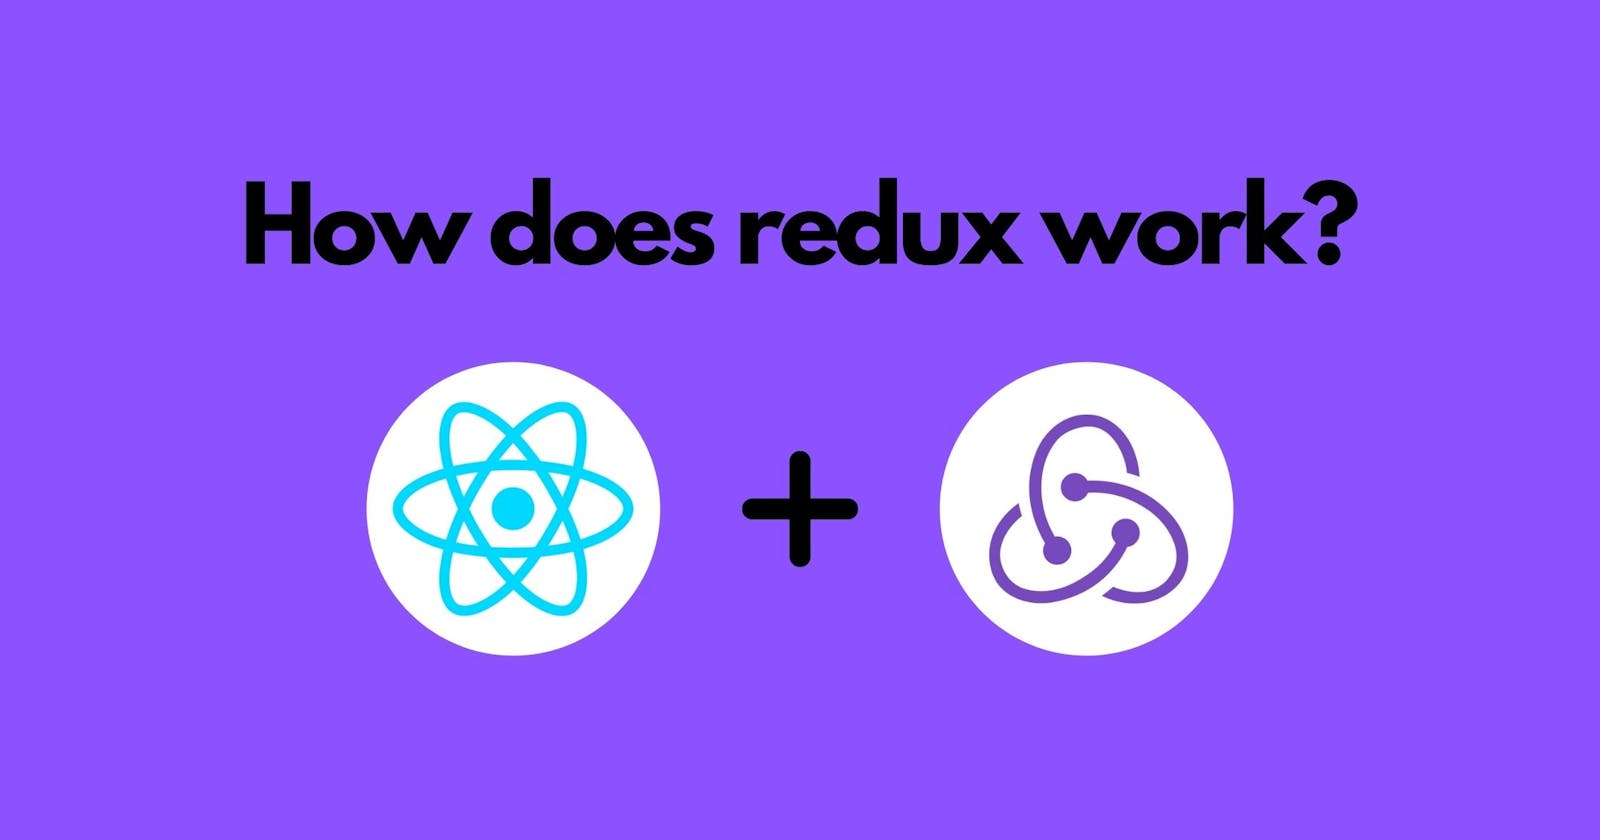 How does Redux work?